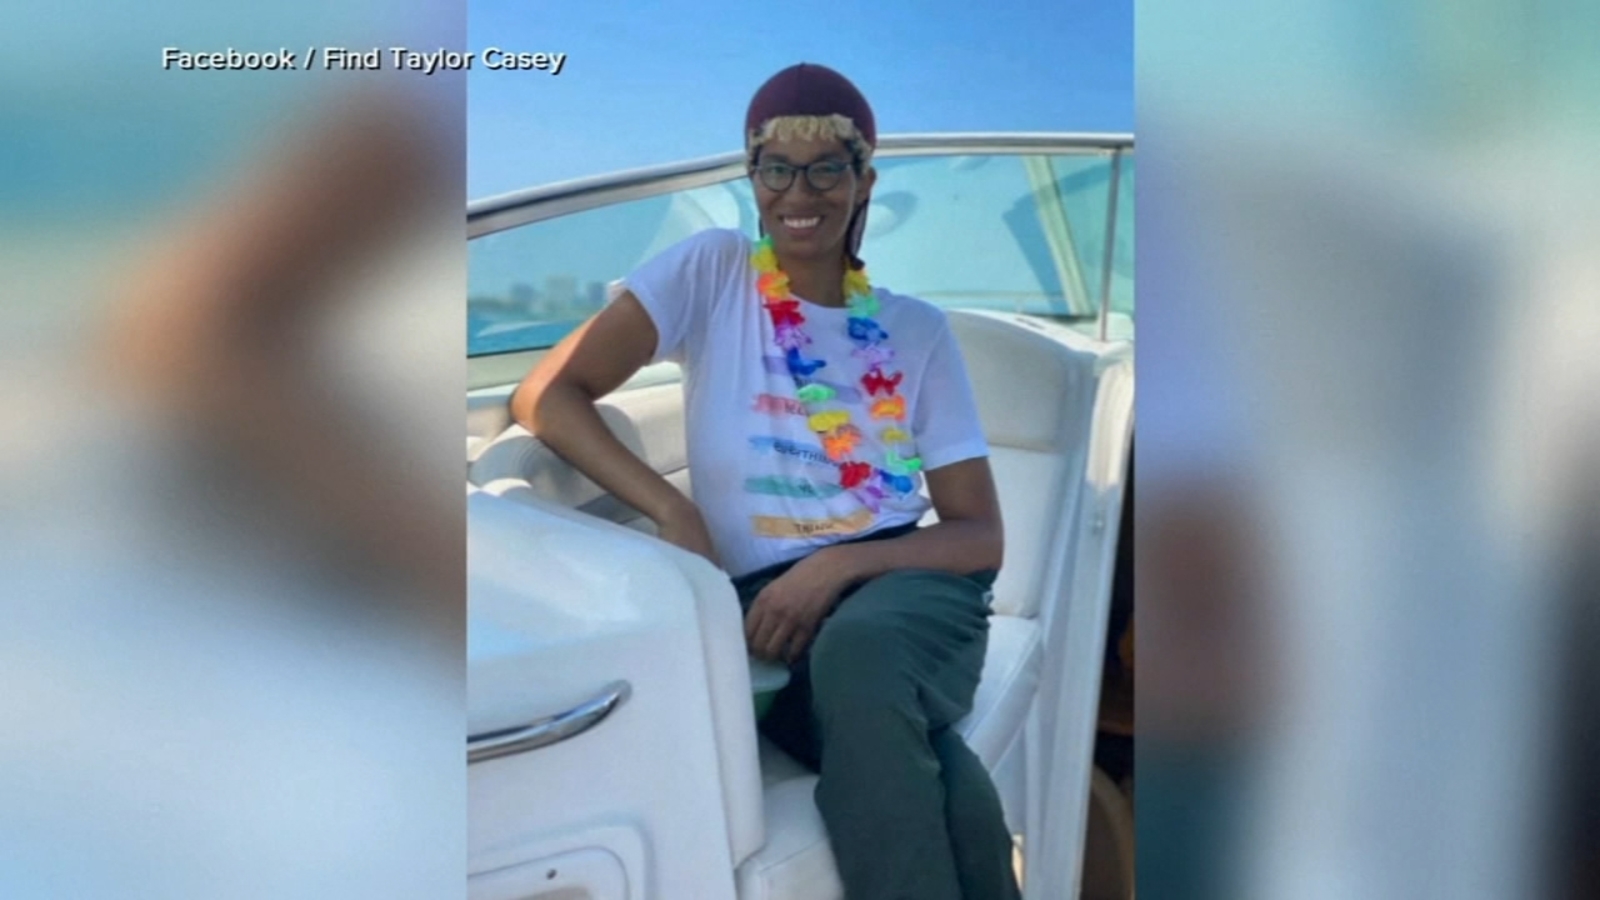 Family of missing Chicago woman Taylor Casey joins Bahamas search effort after she disappeared from yoga retreat [Video]